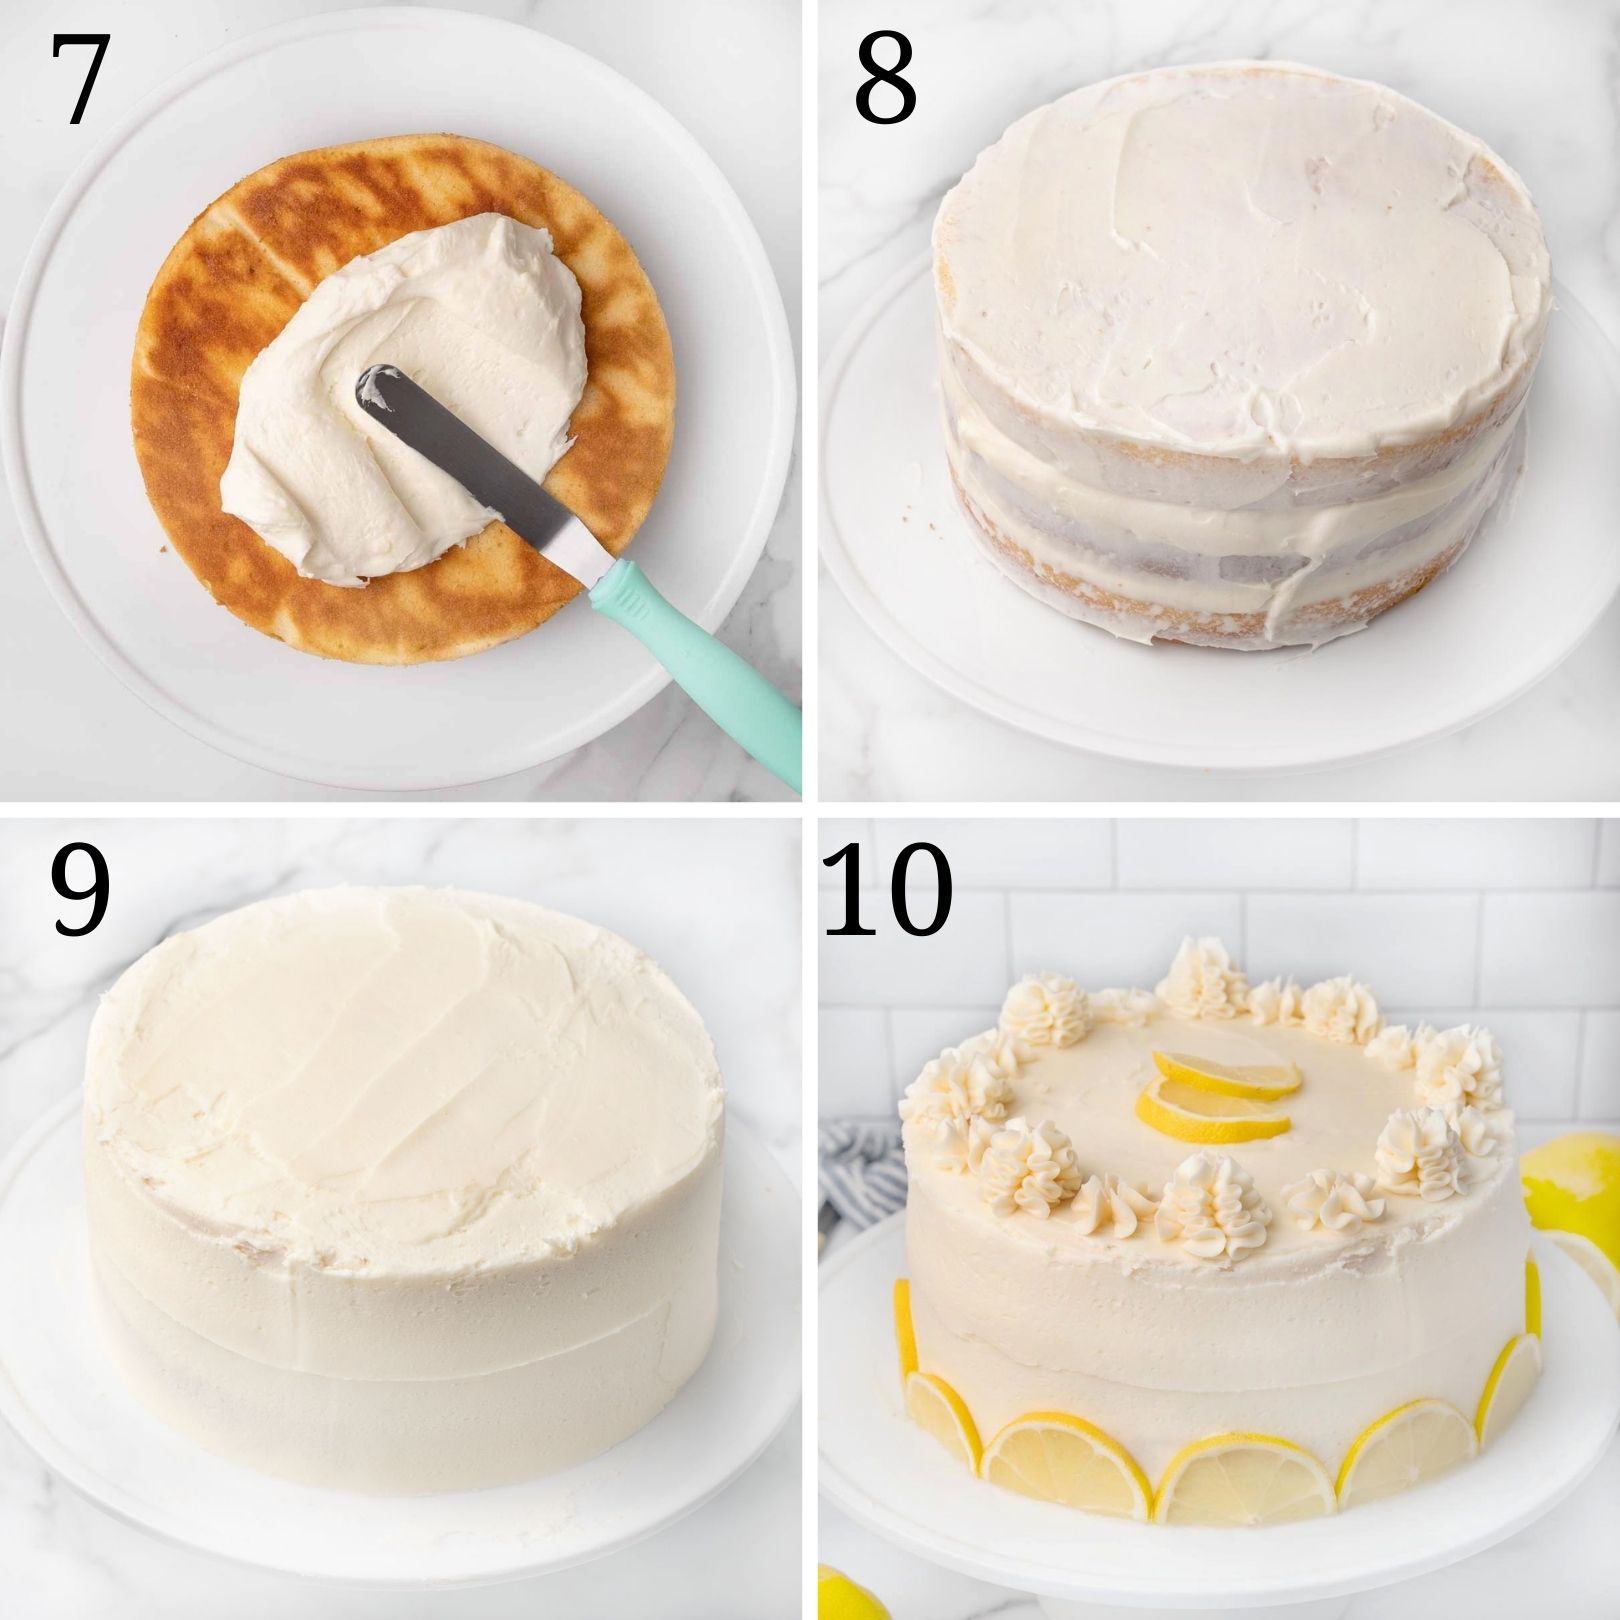 four images showing how to assemble lemon cake